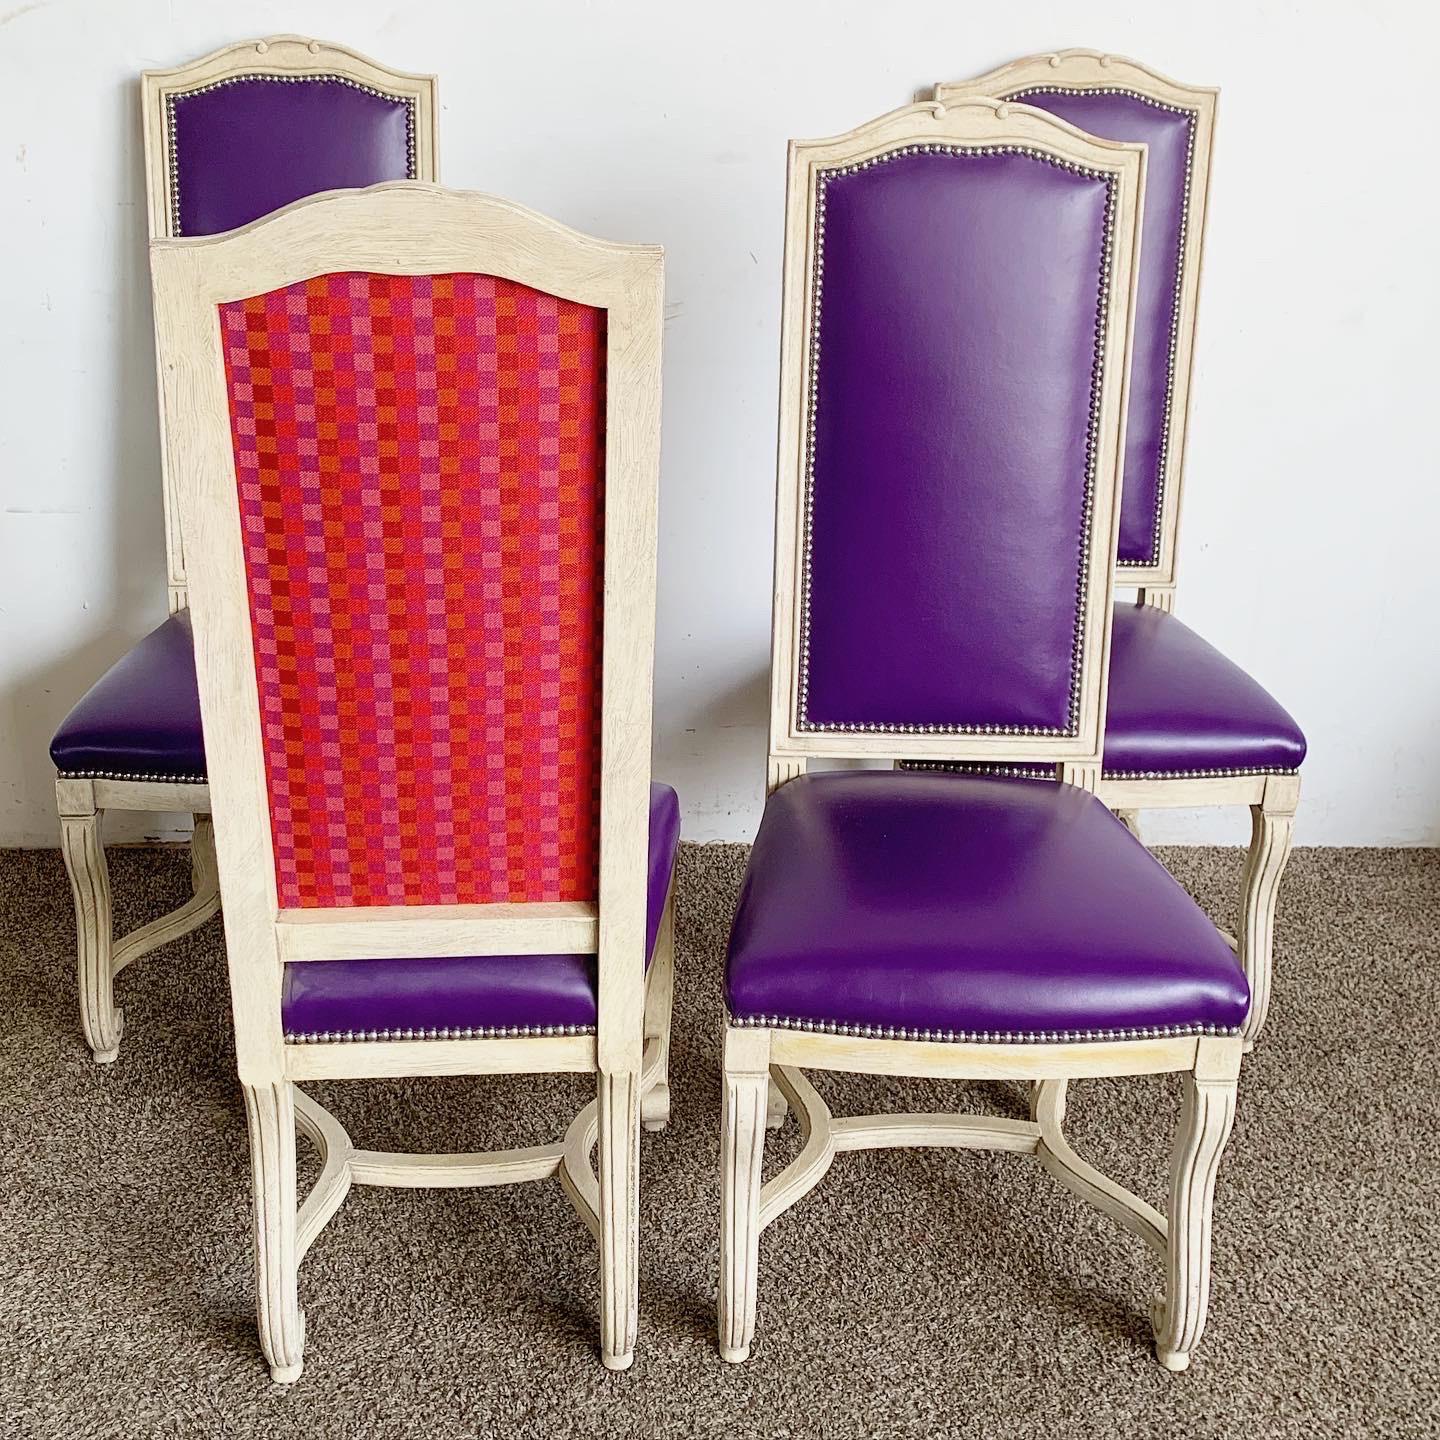 Introducing the French Provincial Purple Vinyl Chairs - Set of 4, a blend of classic elegance and bold modern design.

Rich purple vinyl upholstery for a luxurious touch.
Beautifully platted back showcases intricate craftsmanship.
Delicate curves